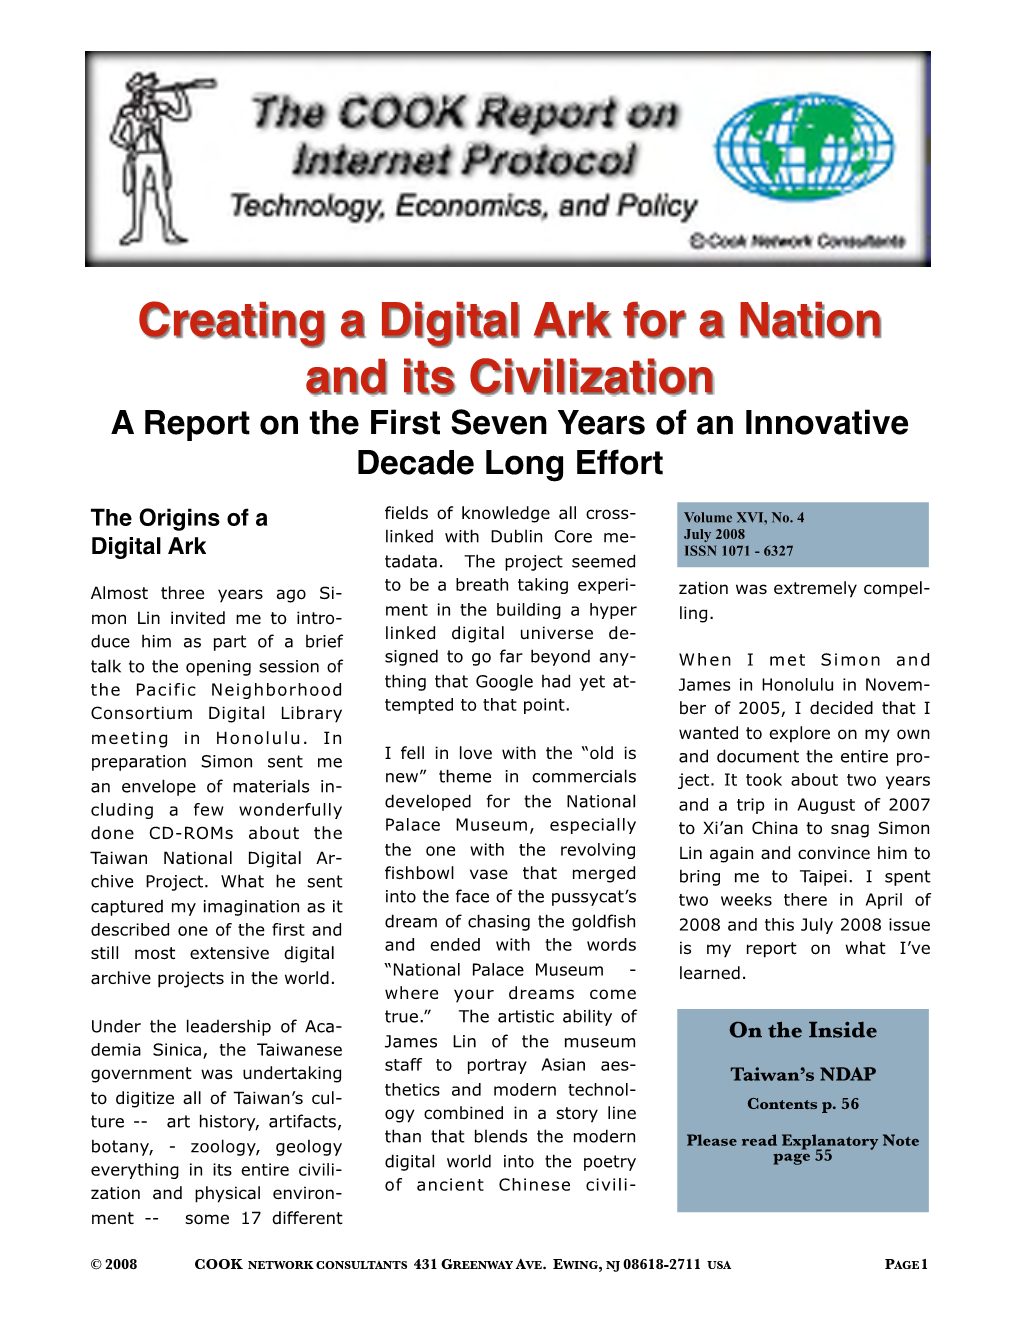 Creating a Digital Ark for a Nation and Its Civilization a Report on the First Seven Years of an Innovative Decade Long Effort